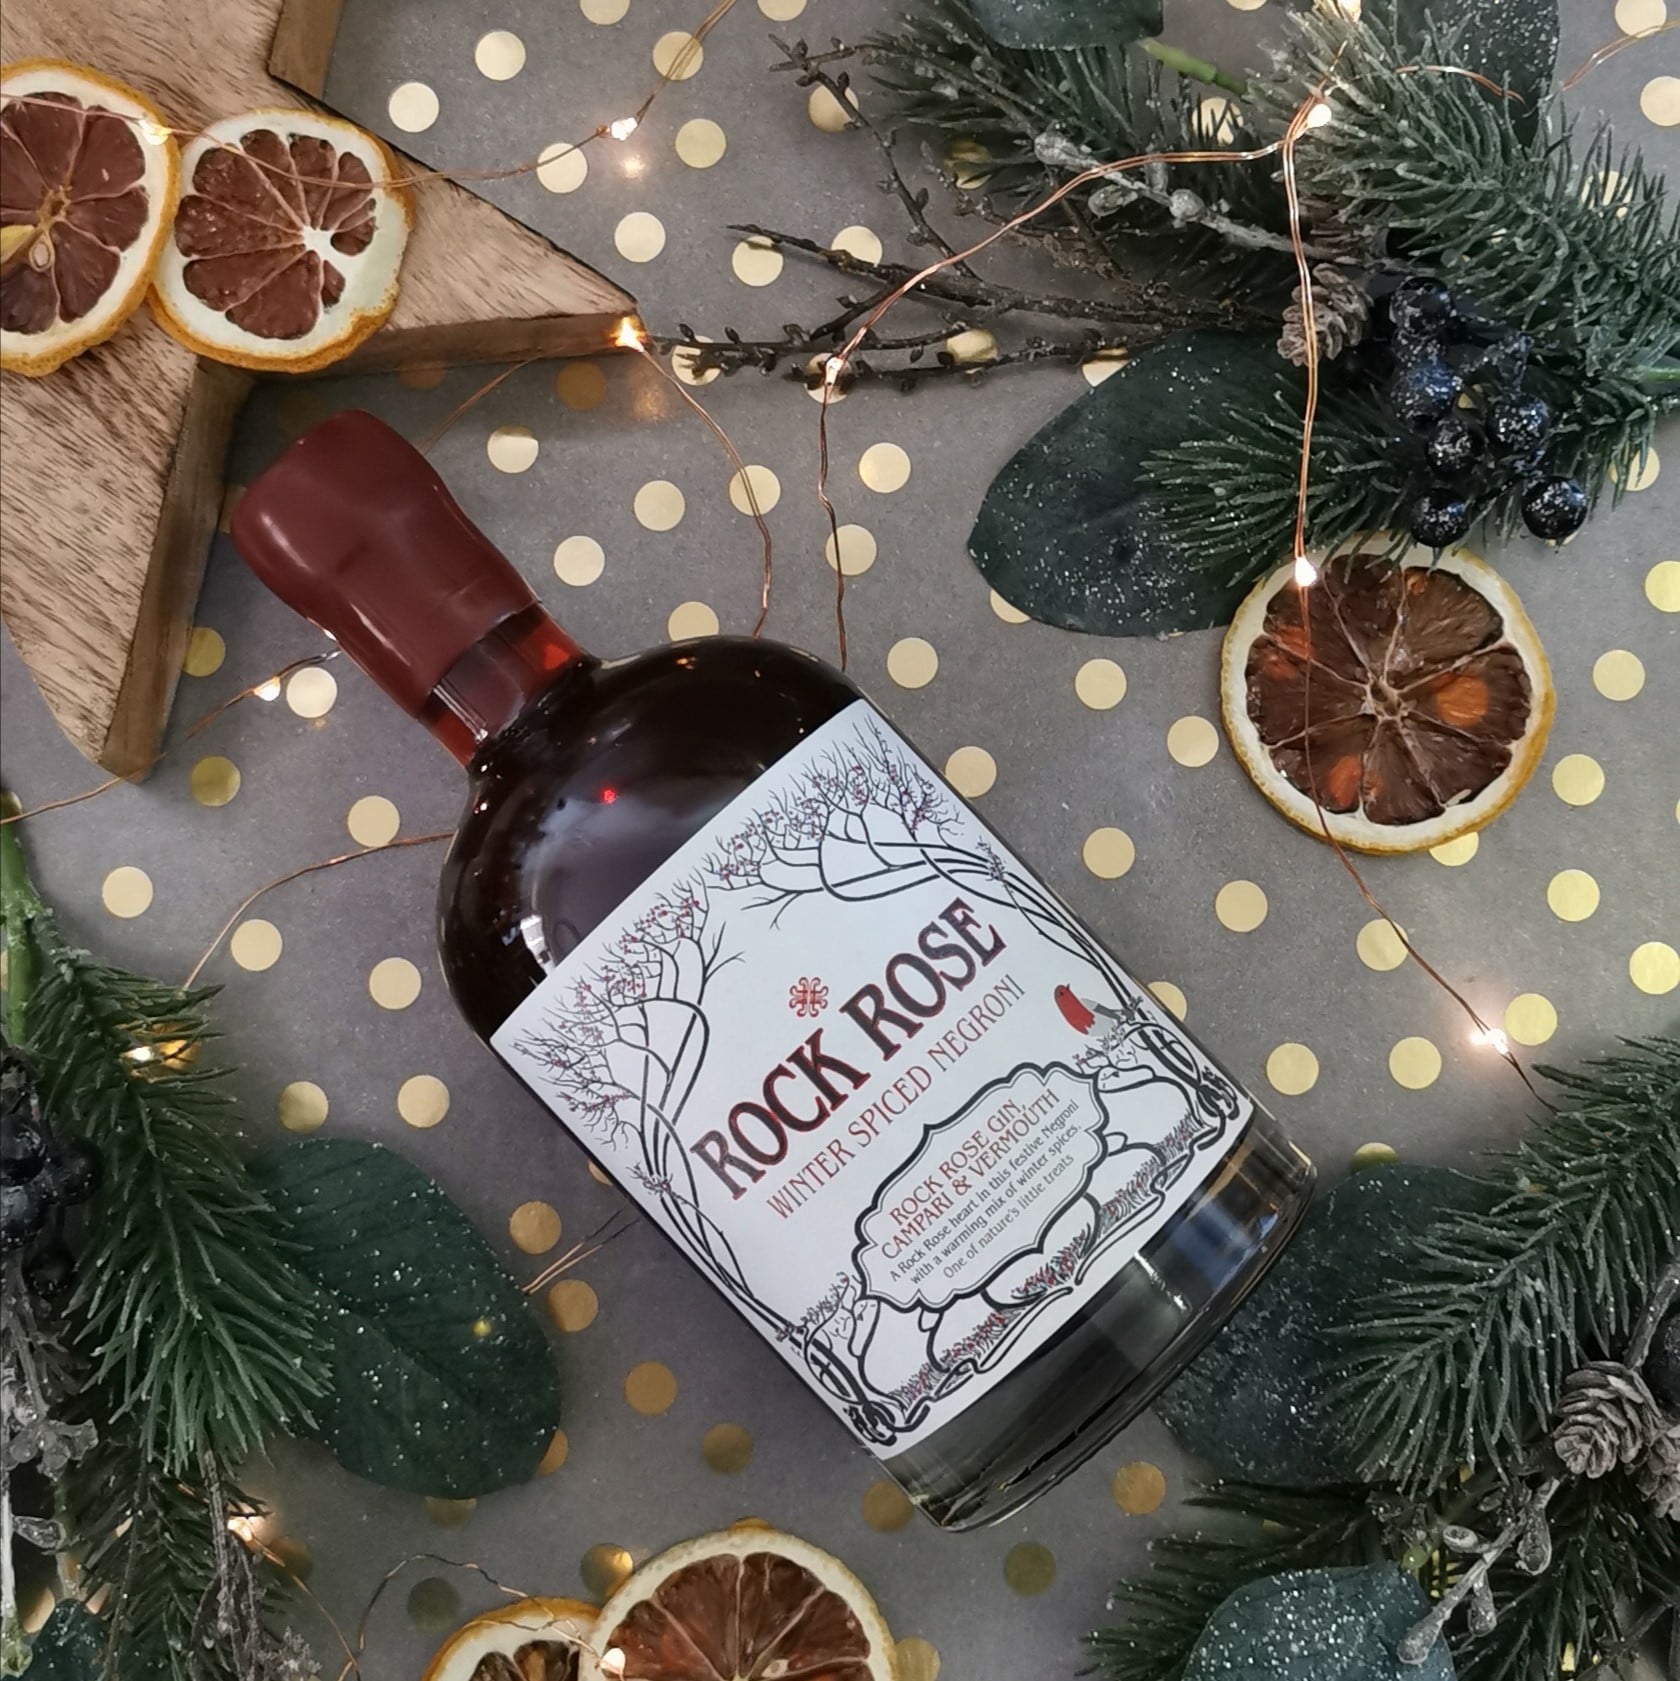 Bottle of Rock Rose Winter Spiced Negroni on a table with festive decoration